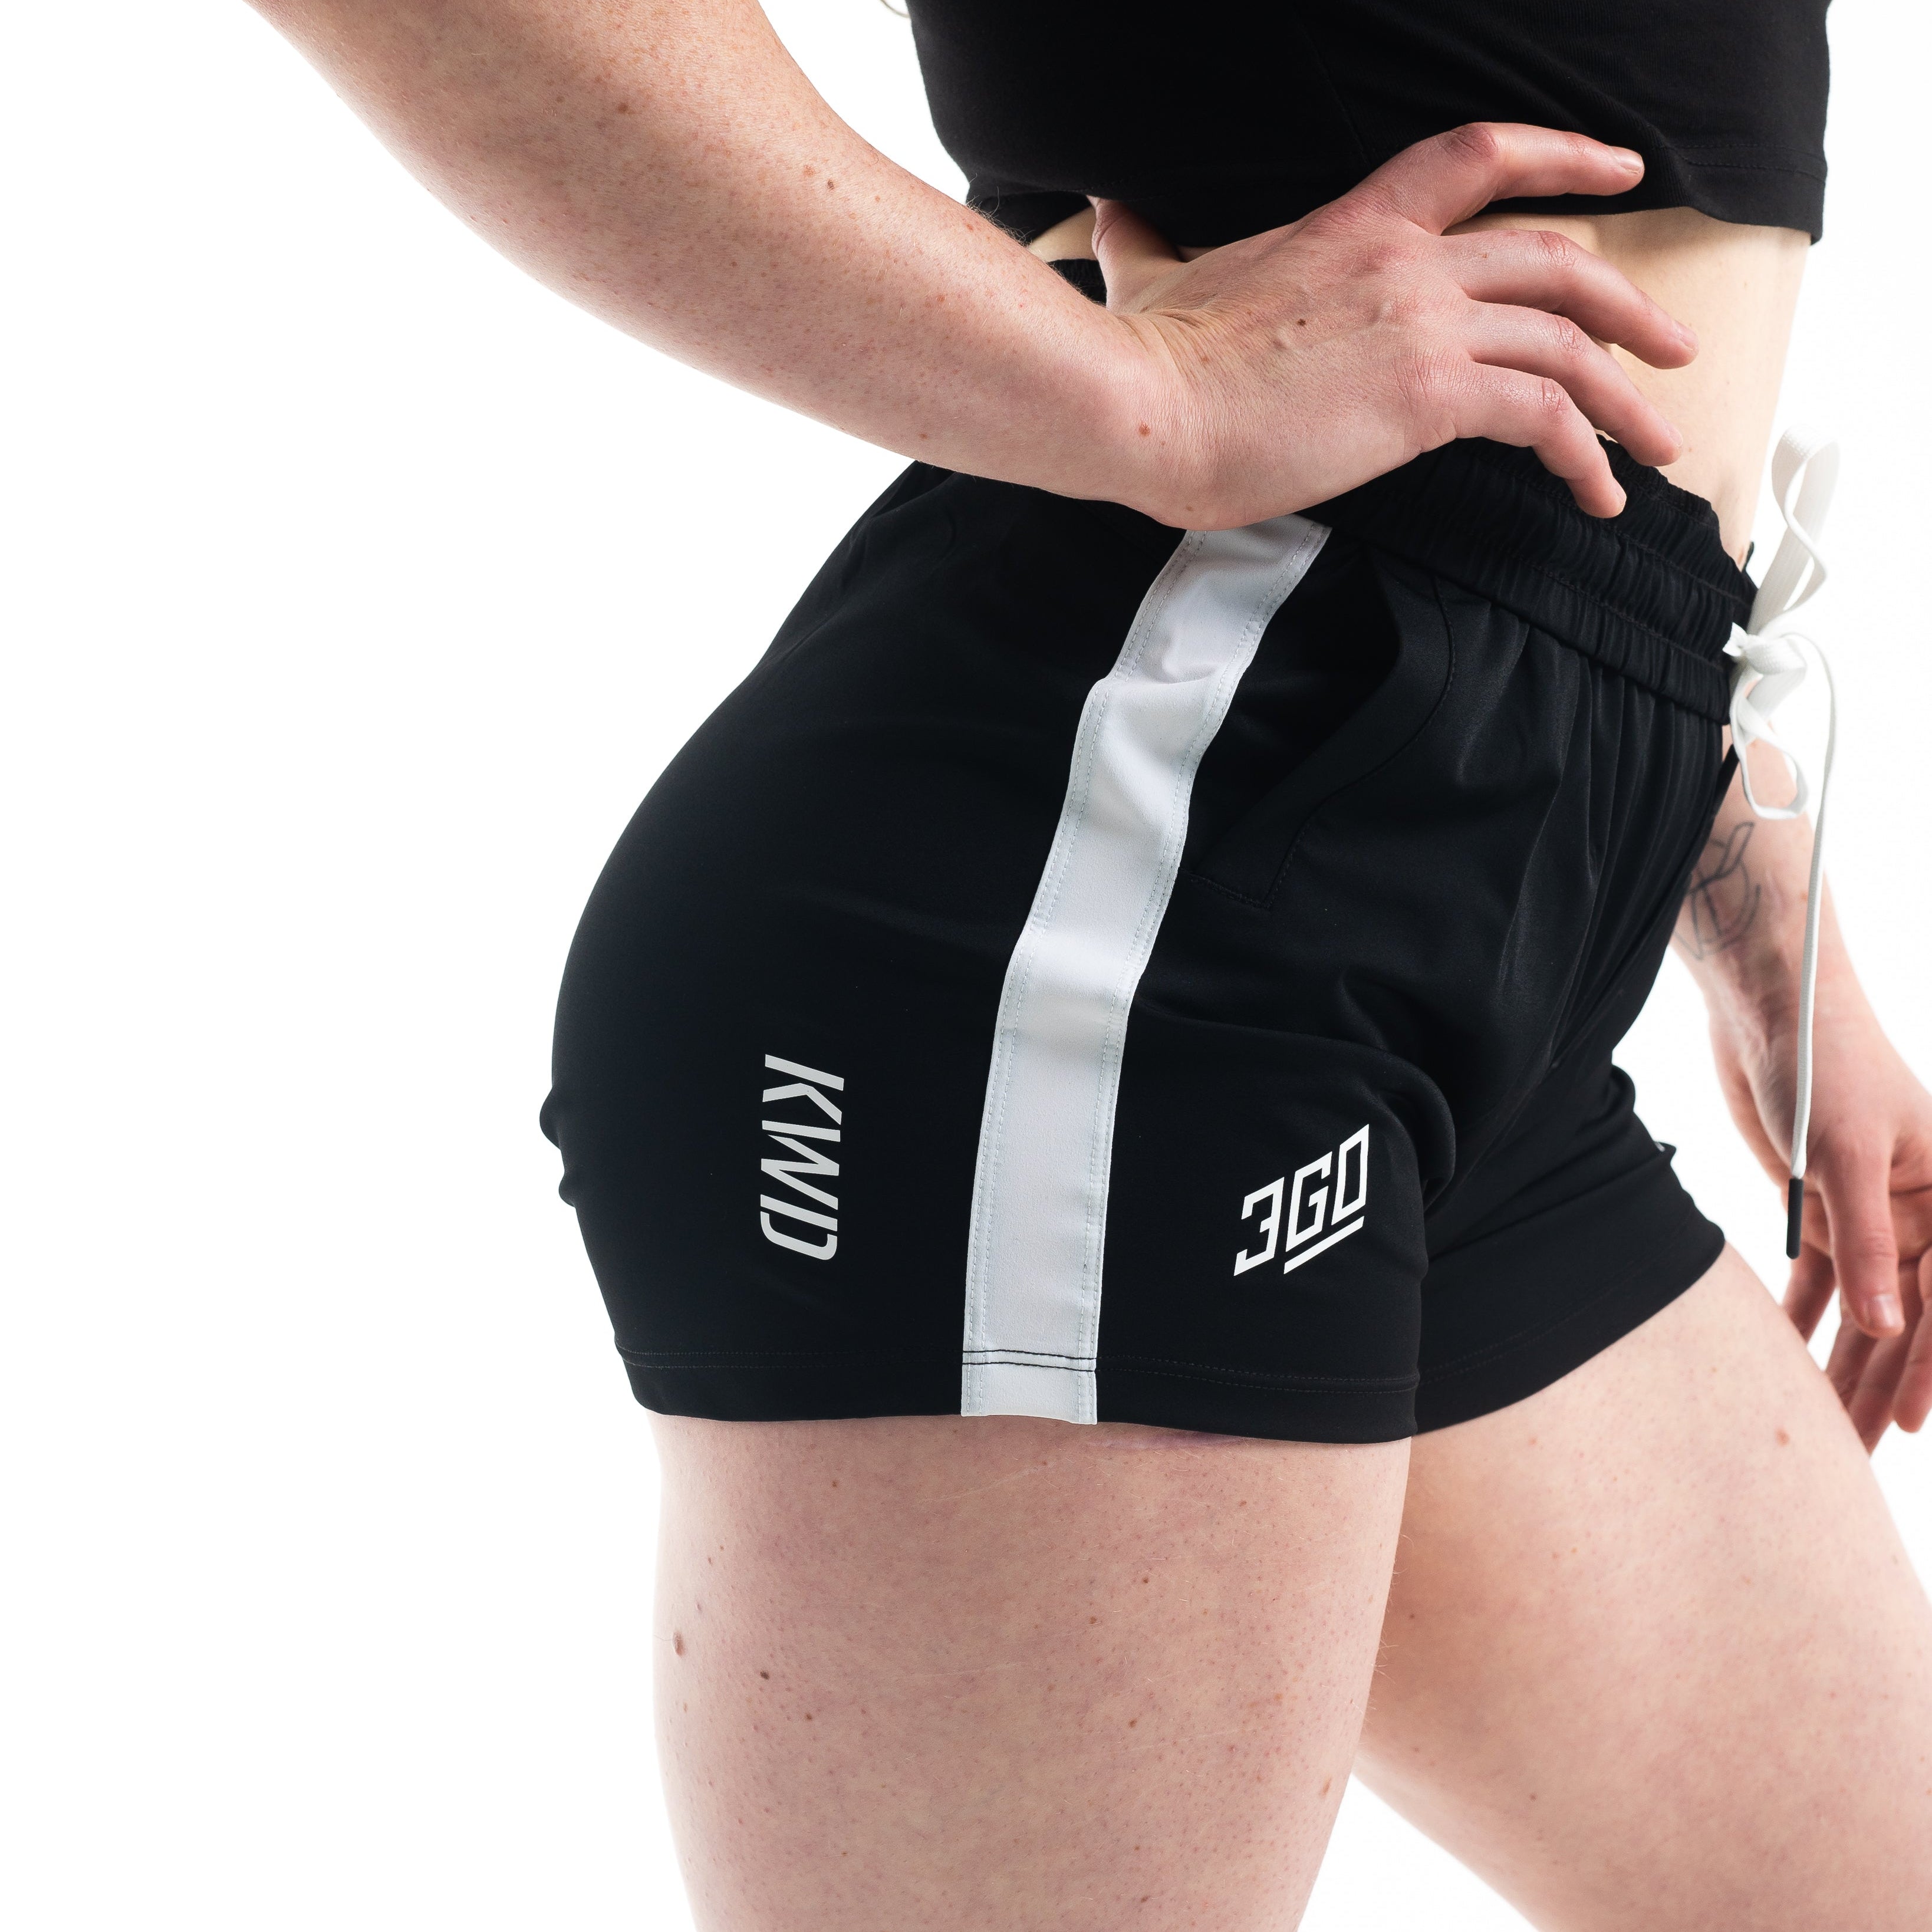 360GO was created to provide the flexibility for all movements in your training while offering comfort. These shorts offer 360 degrees of stretch in all angles and allow you to remain comfortable without limiting any movement in both training and life environments. Designed with a wide drawstring to easily adjust your waist without slipping. Purchase 360GO Domino Squat Shorts from A7 Europe. Genouillères powerlifting shipping to France, Spain, Ireland, Germany, Italy, Sweden and EU.